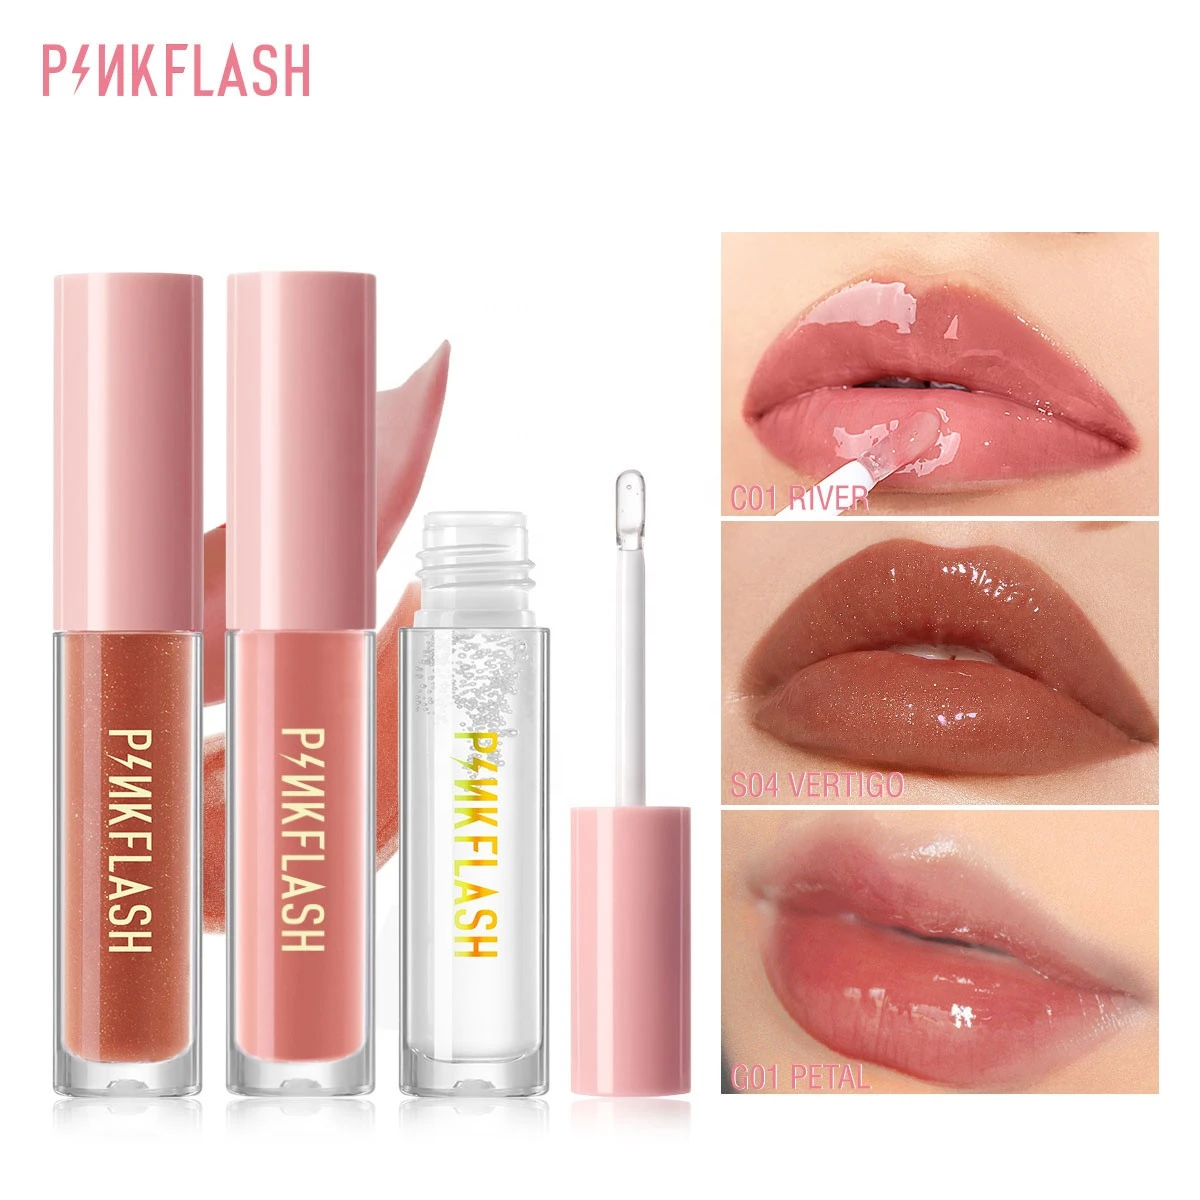 PINKFLASH Moisturizing Shiny Non-Sticky Long Lasting Provides Maximum Color Glides on Lip Clear Lacquer Lip Gloss